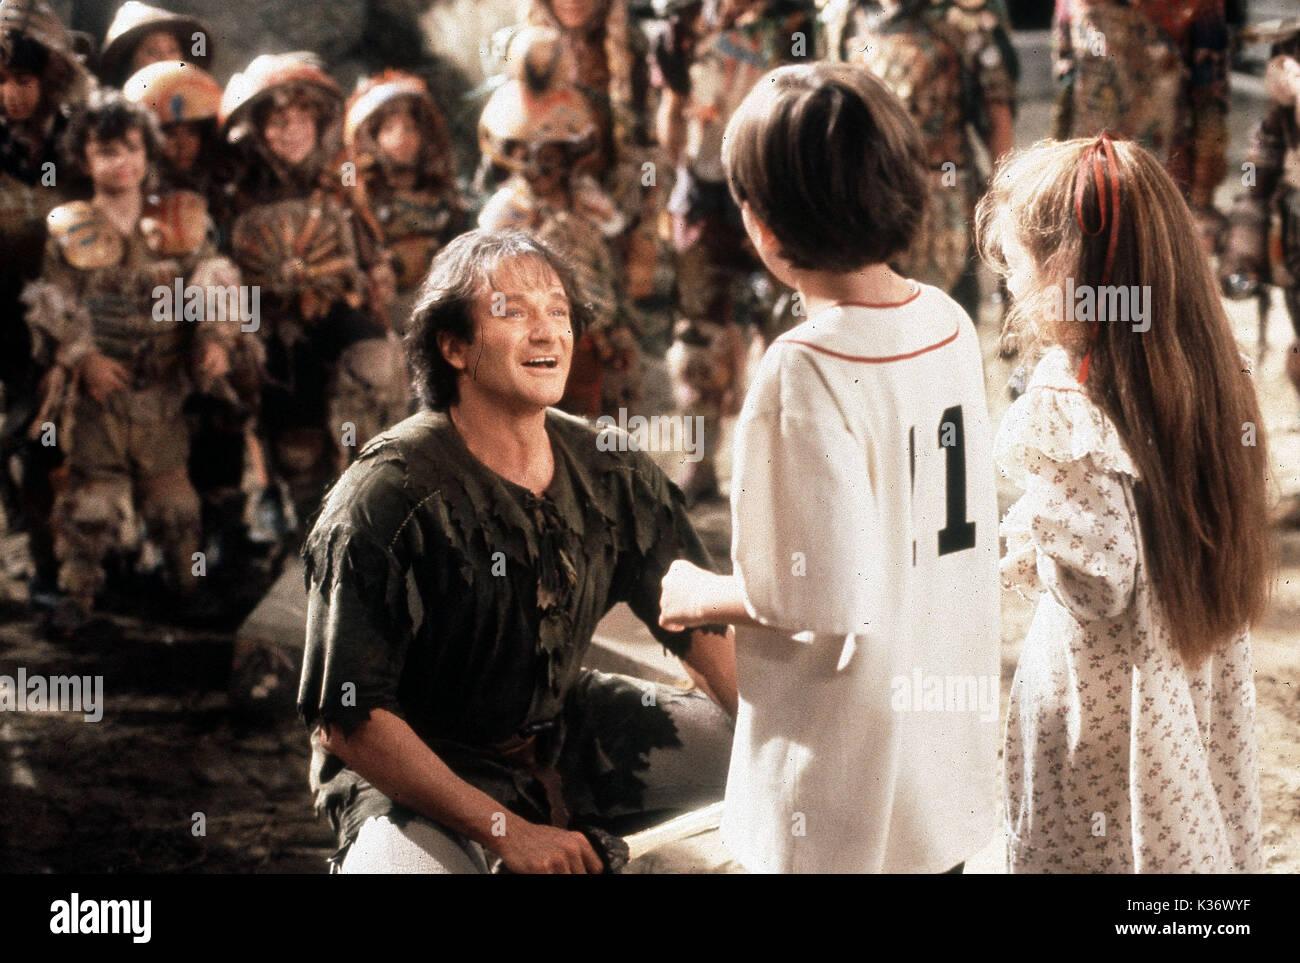 HOOK ROBIN WILLIAMS PICTURE FROM THE RONALD GRANT ARHIVE A TRISTAR FILM     Date: 1992 Stock Photo